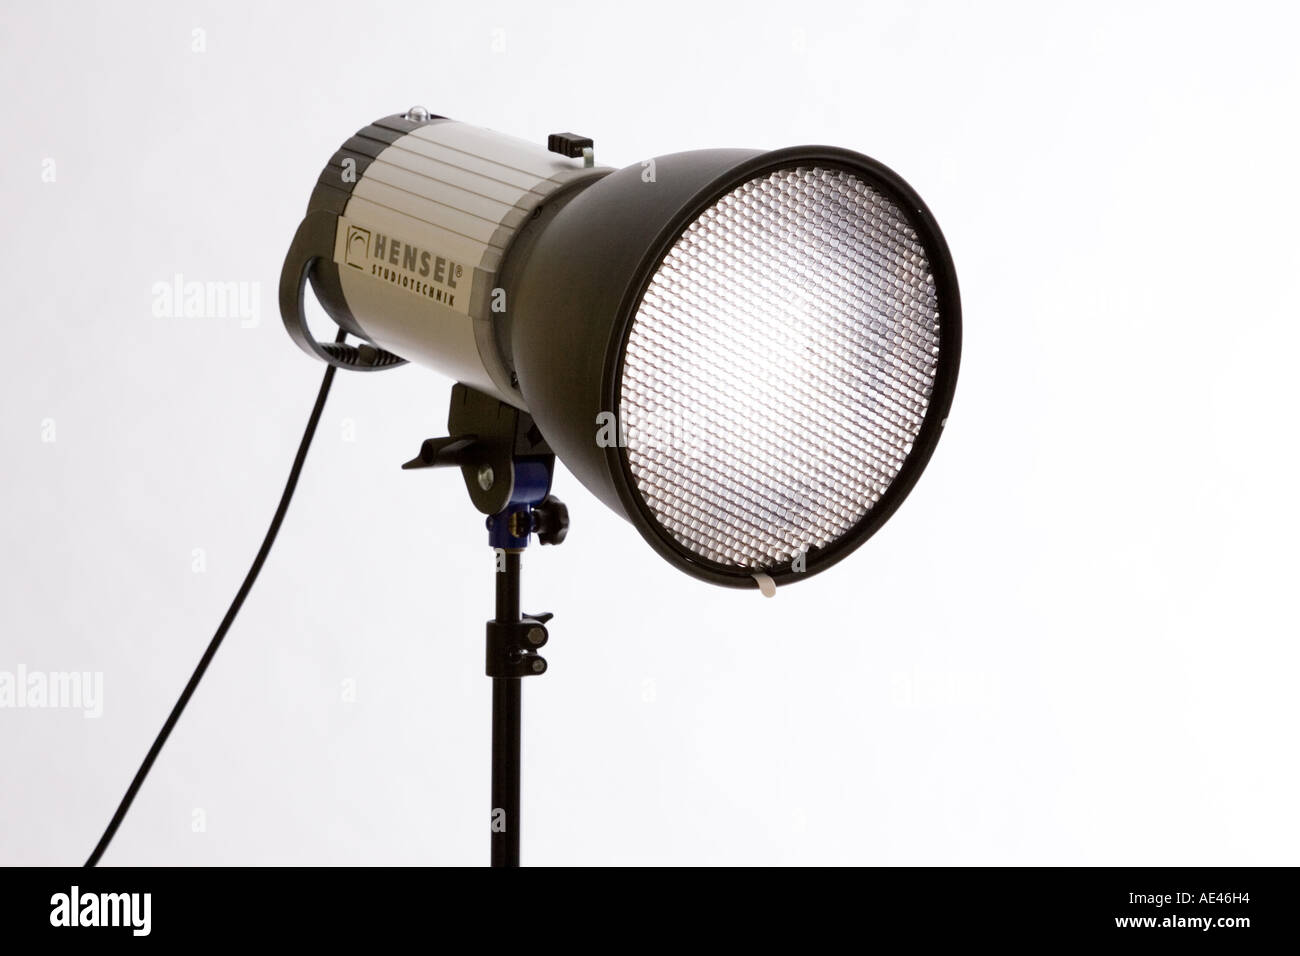 A photographic studio flash lighting head and reflector with grid at front Stock Photo